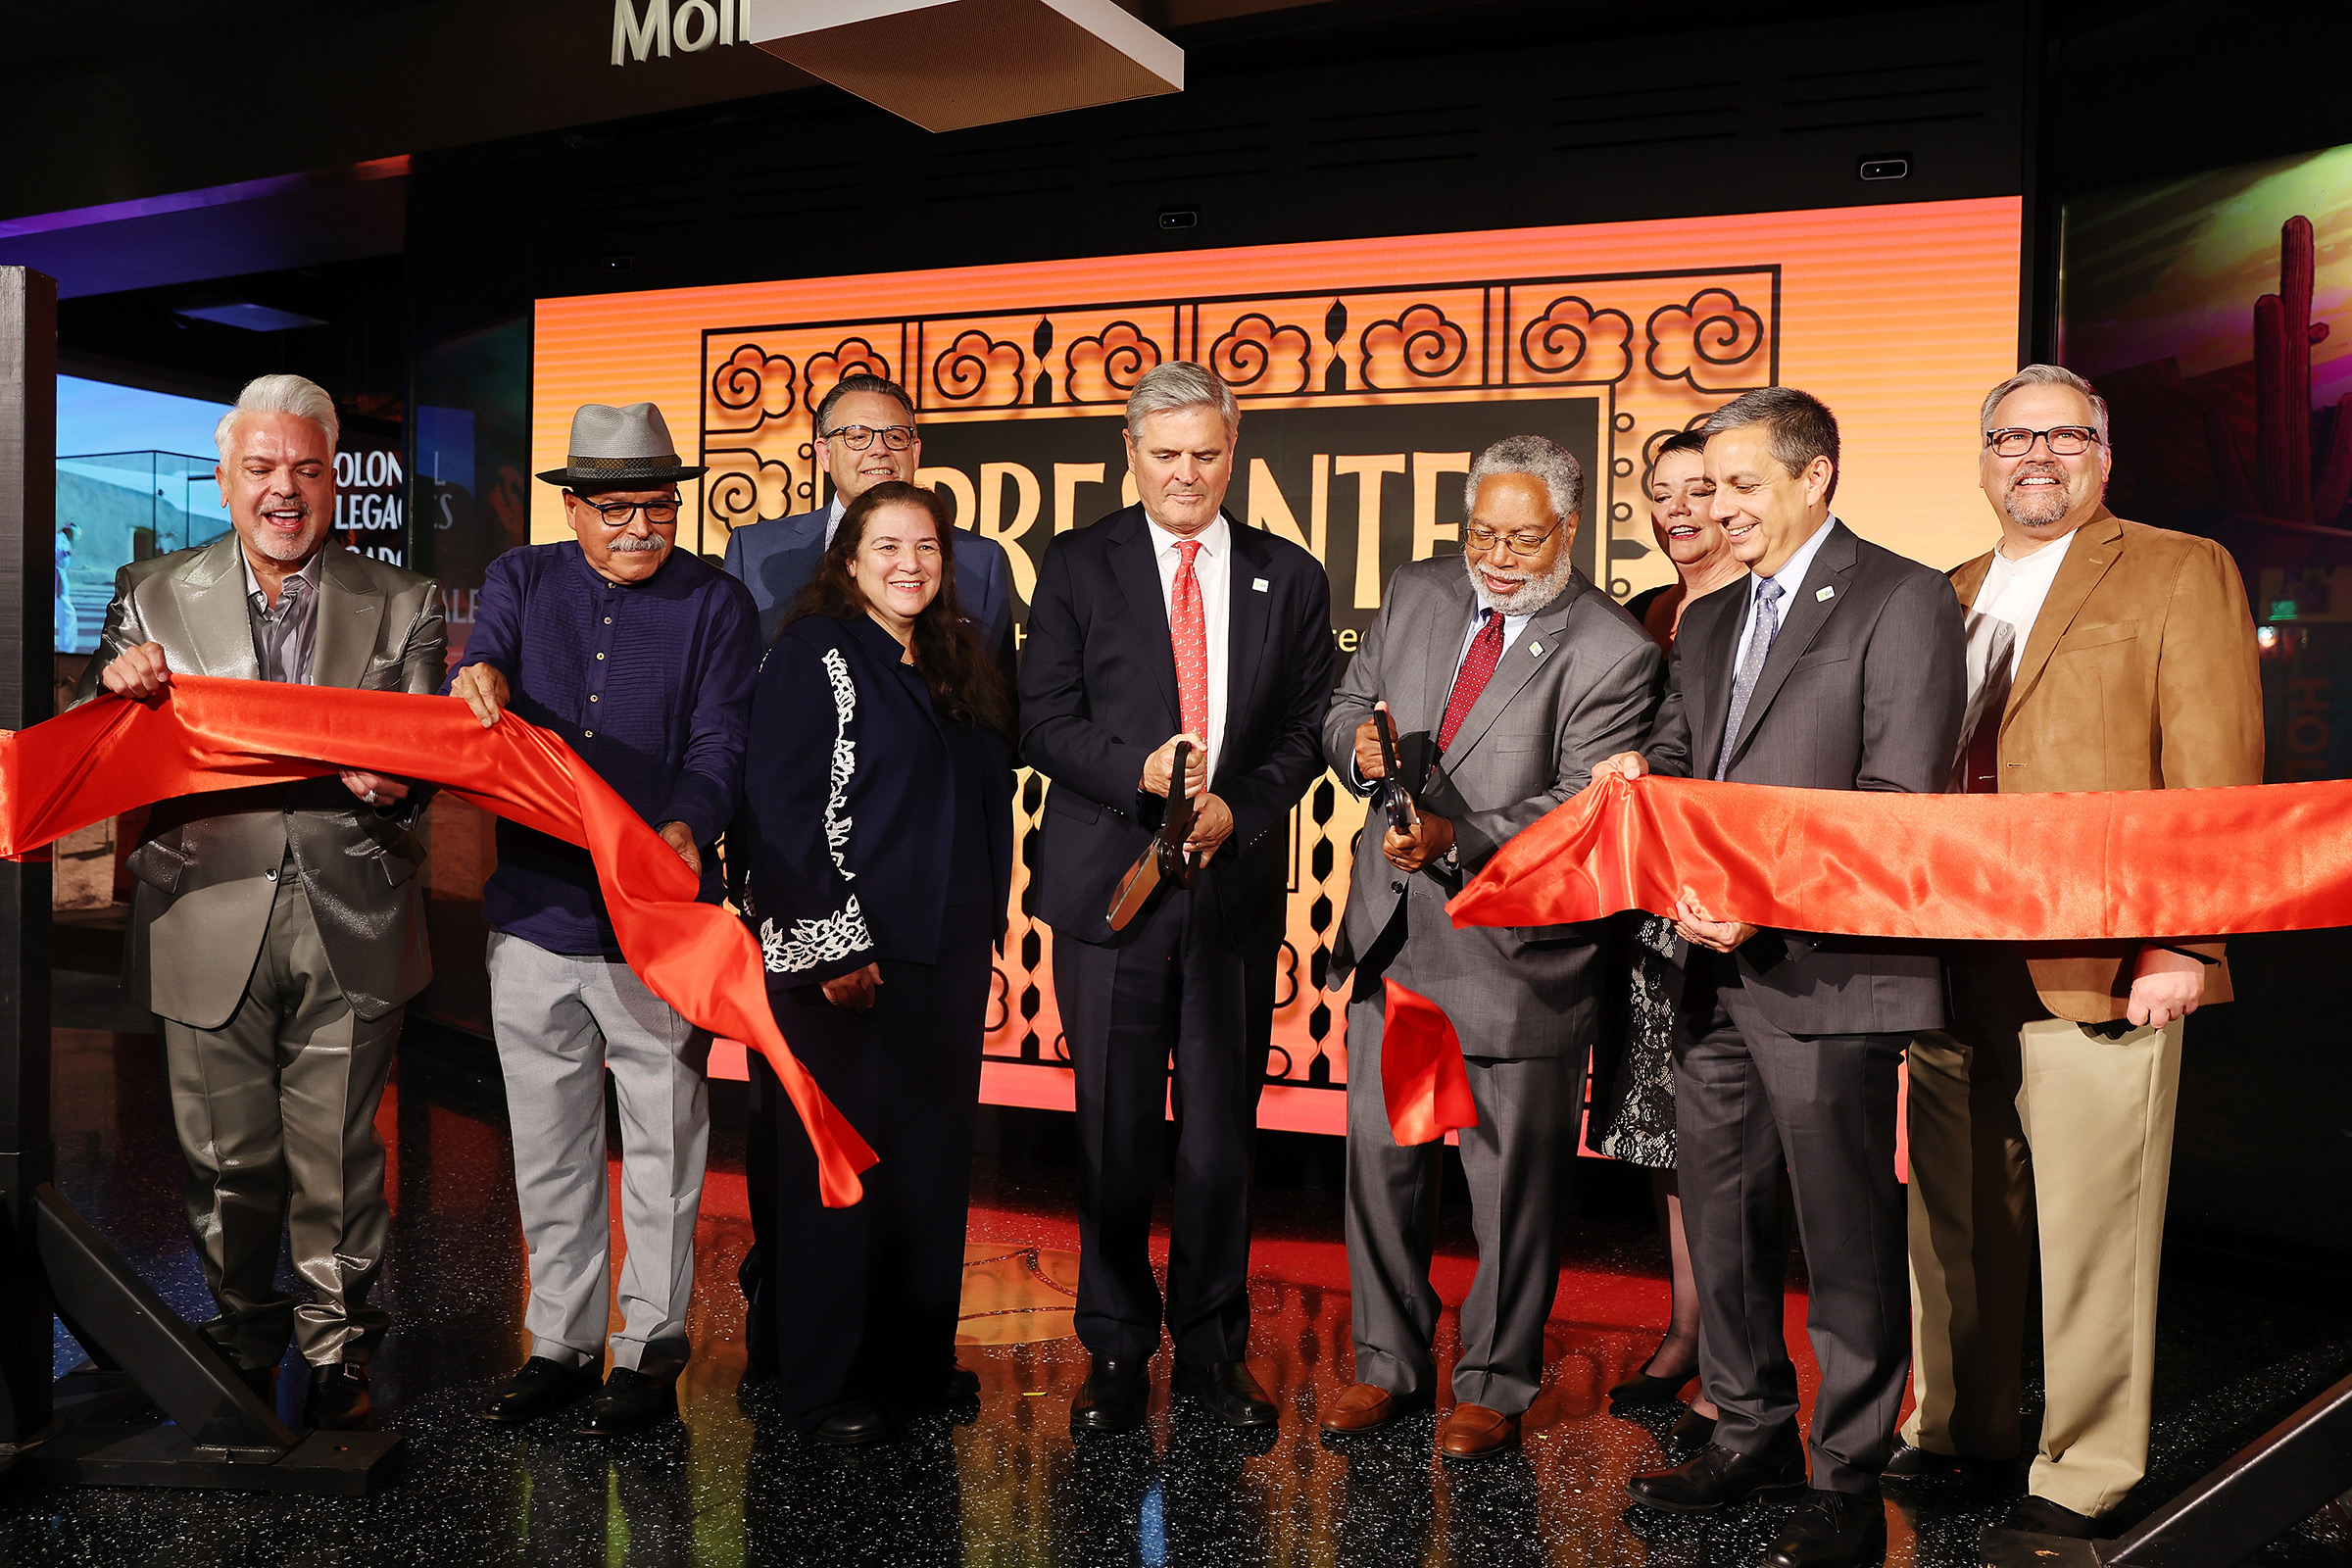 From left: Henry R. Muñoz III, Eduardo Díaz, J. Mario Molina, Martha Molina Bernadett, Steve Case, Lonnie Bunch, III, Josephine Molina, Jorge Zamanillo and John C. Molina cut the opening ribbon during the '¡Presente! A Latino History of the United States' exhibition reception at the National Museum of American History in Washington, D.C., on June 16, 2022. (Tasos Katopodis—Getty Images for Smithsonian Latino Museum)